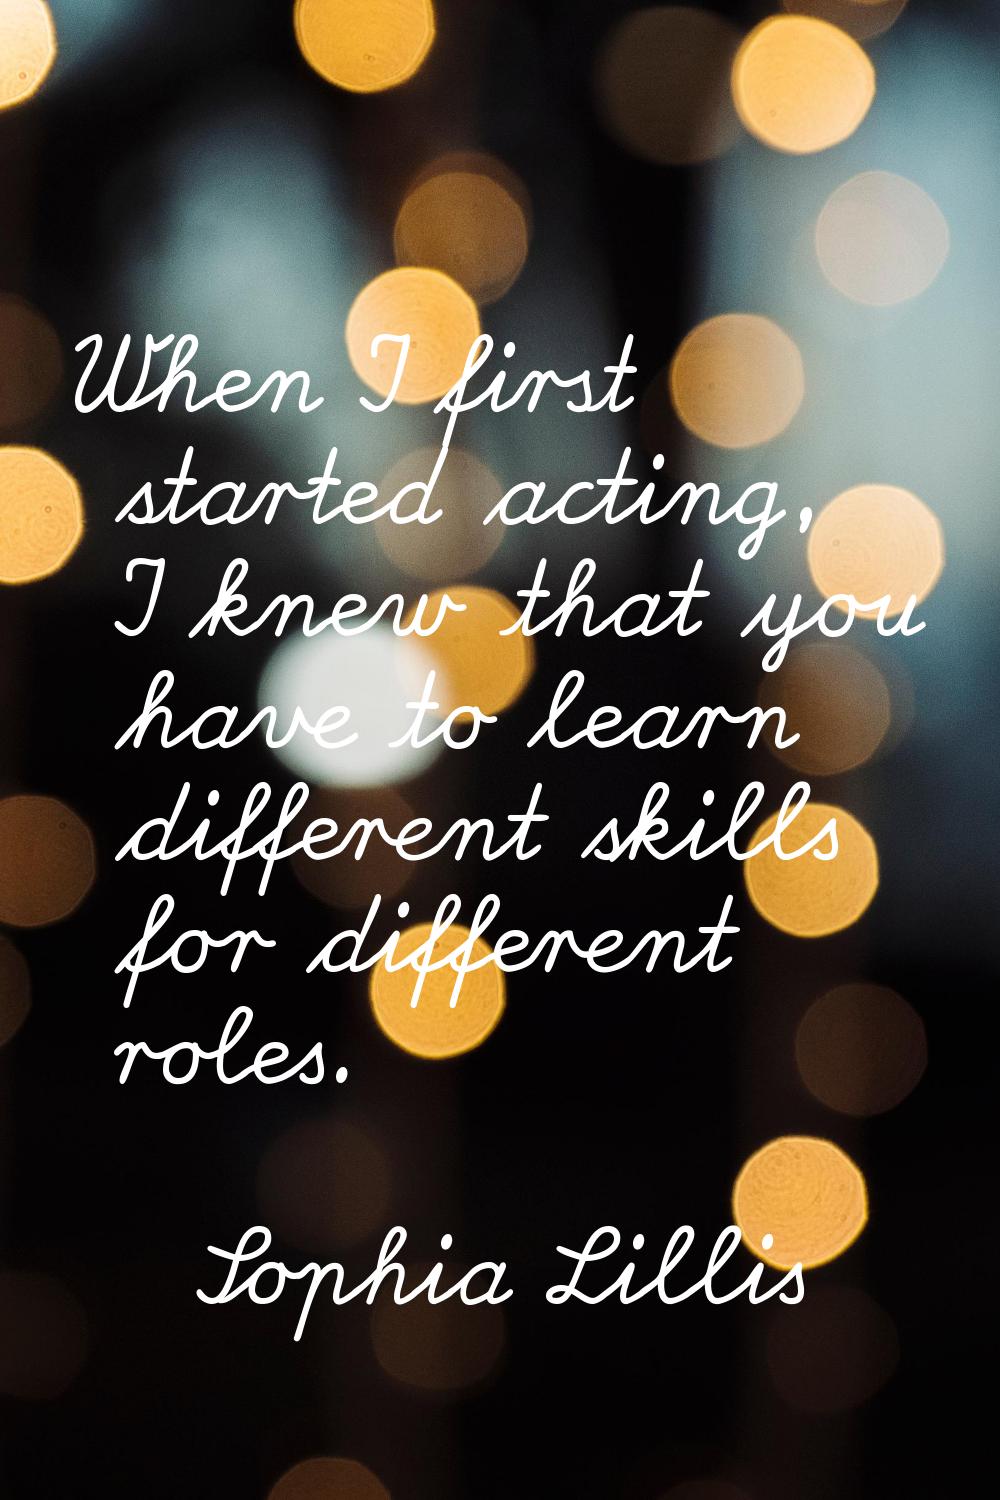 When I first started acting, I knew that you have to learn different skills for different roles.